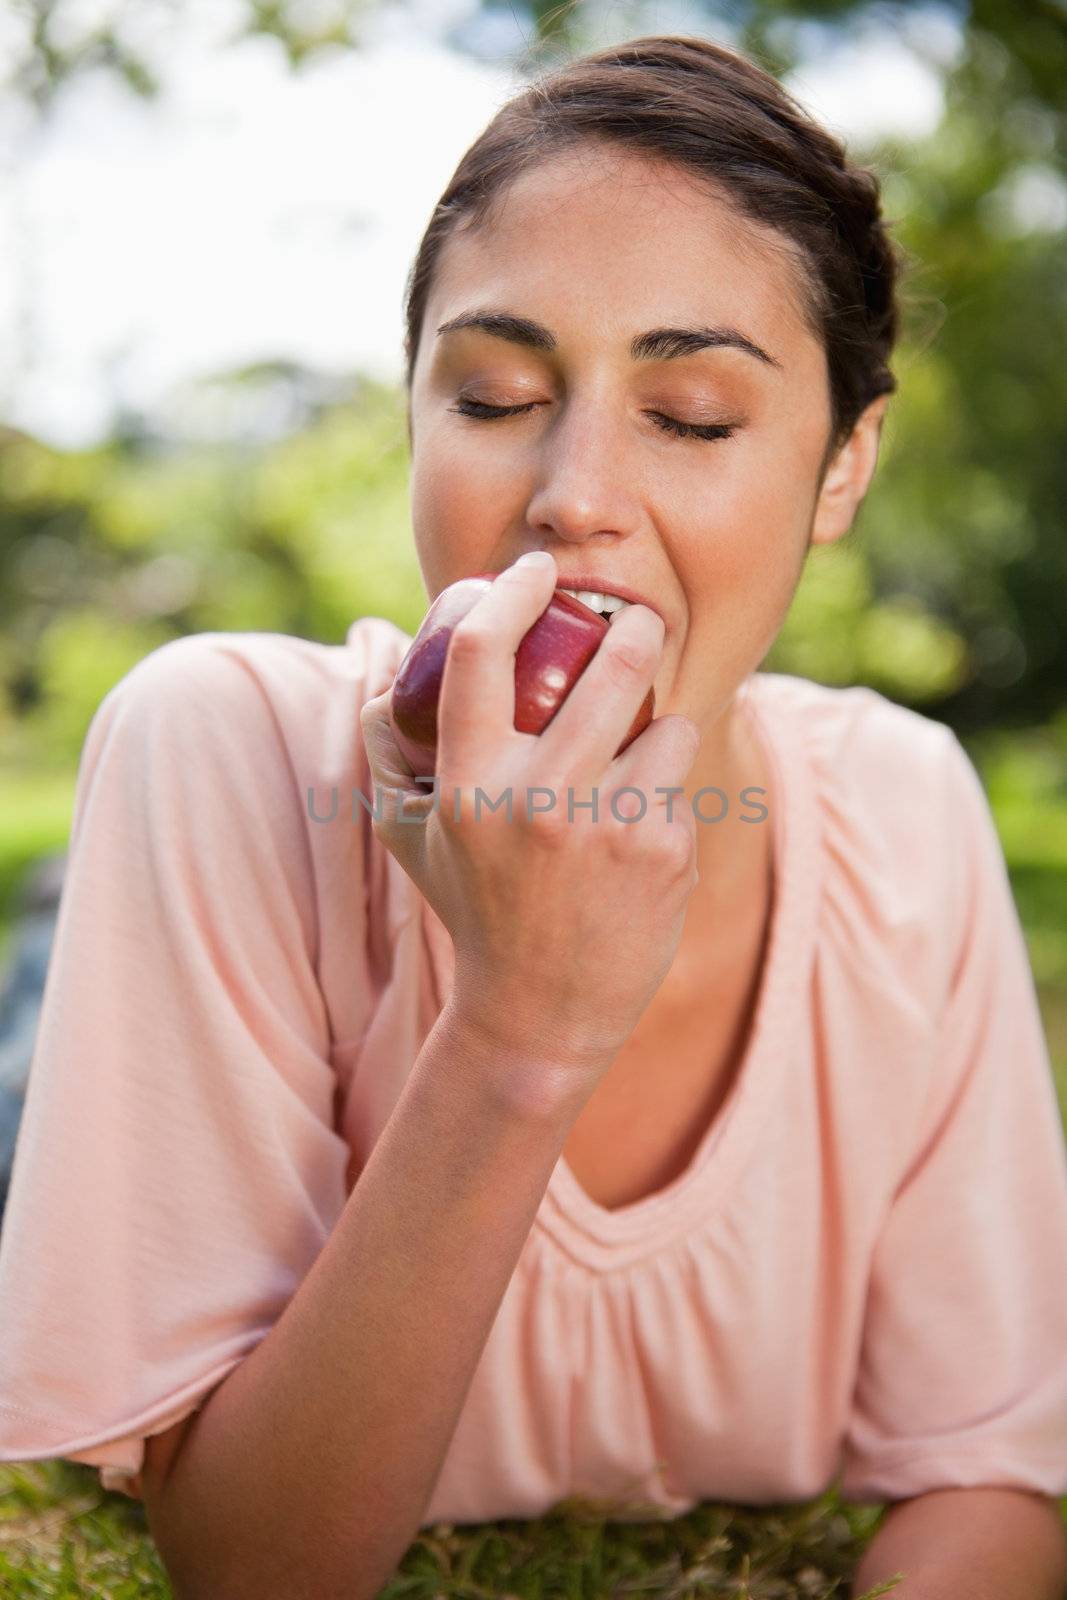 Young woman bites into a red apple while lying prone in grass